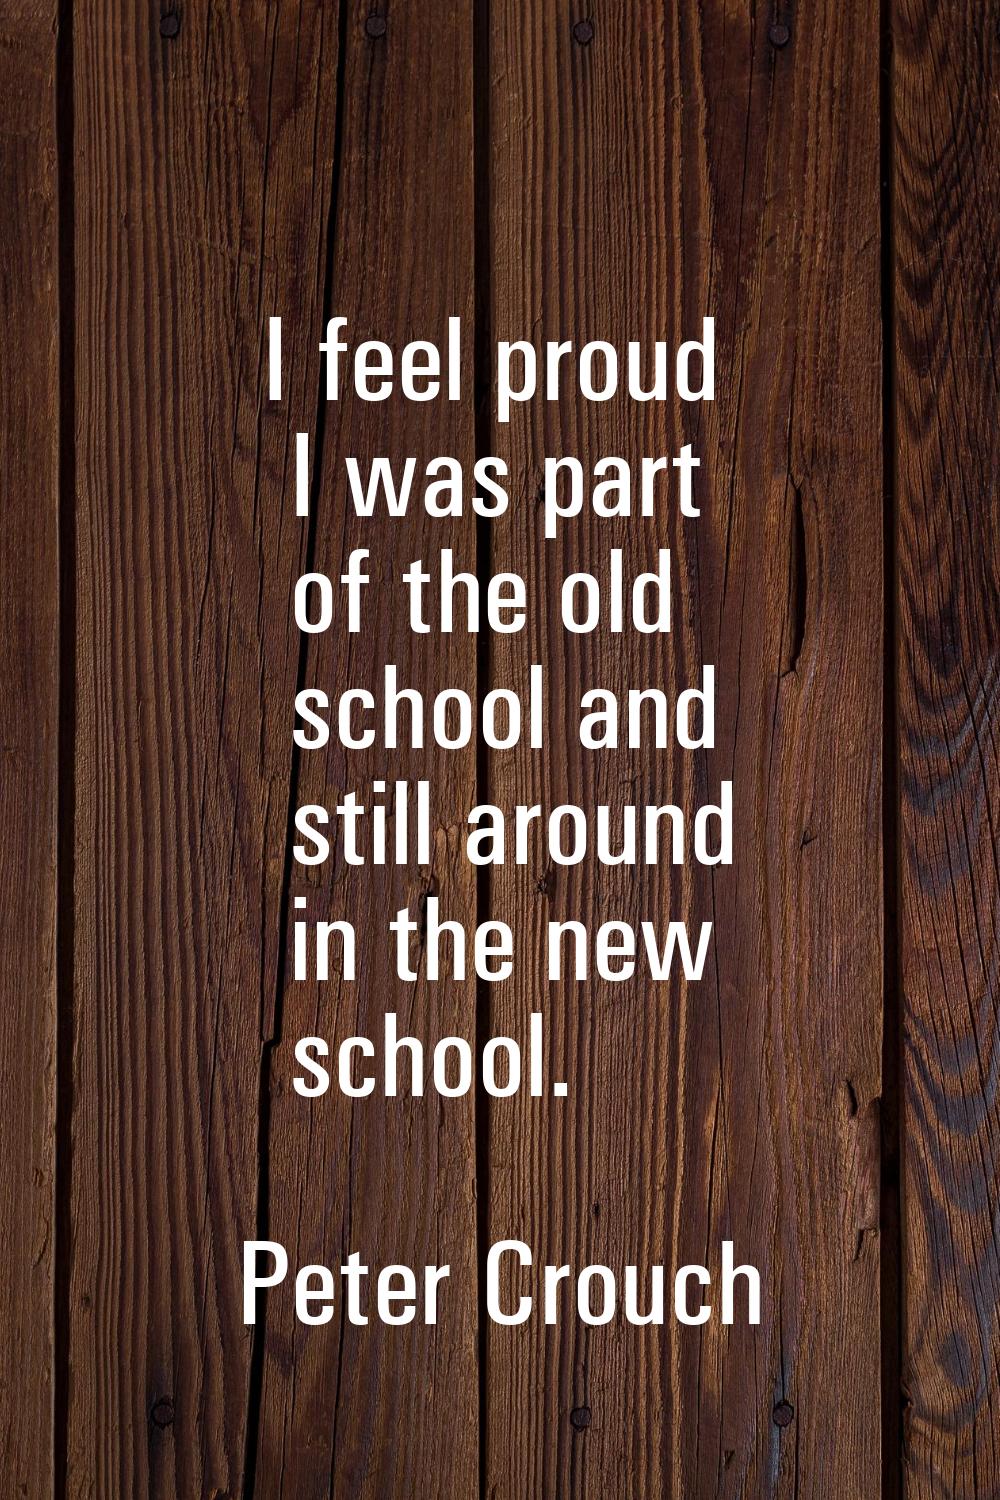 I feel proud I was part of the old school and still around in the new school.